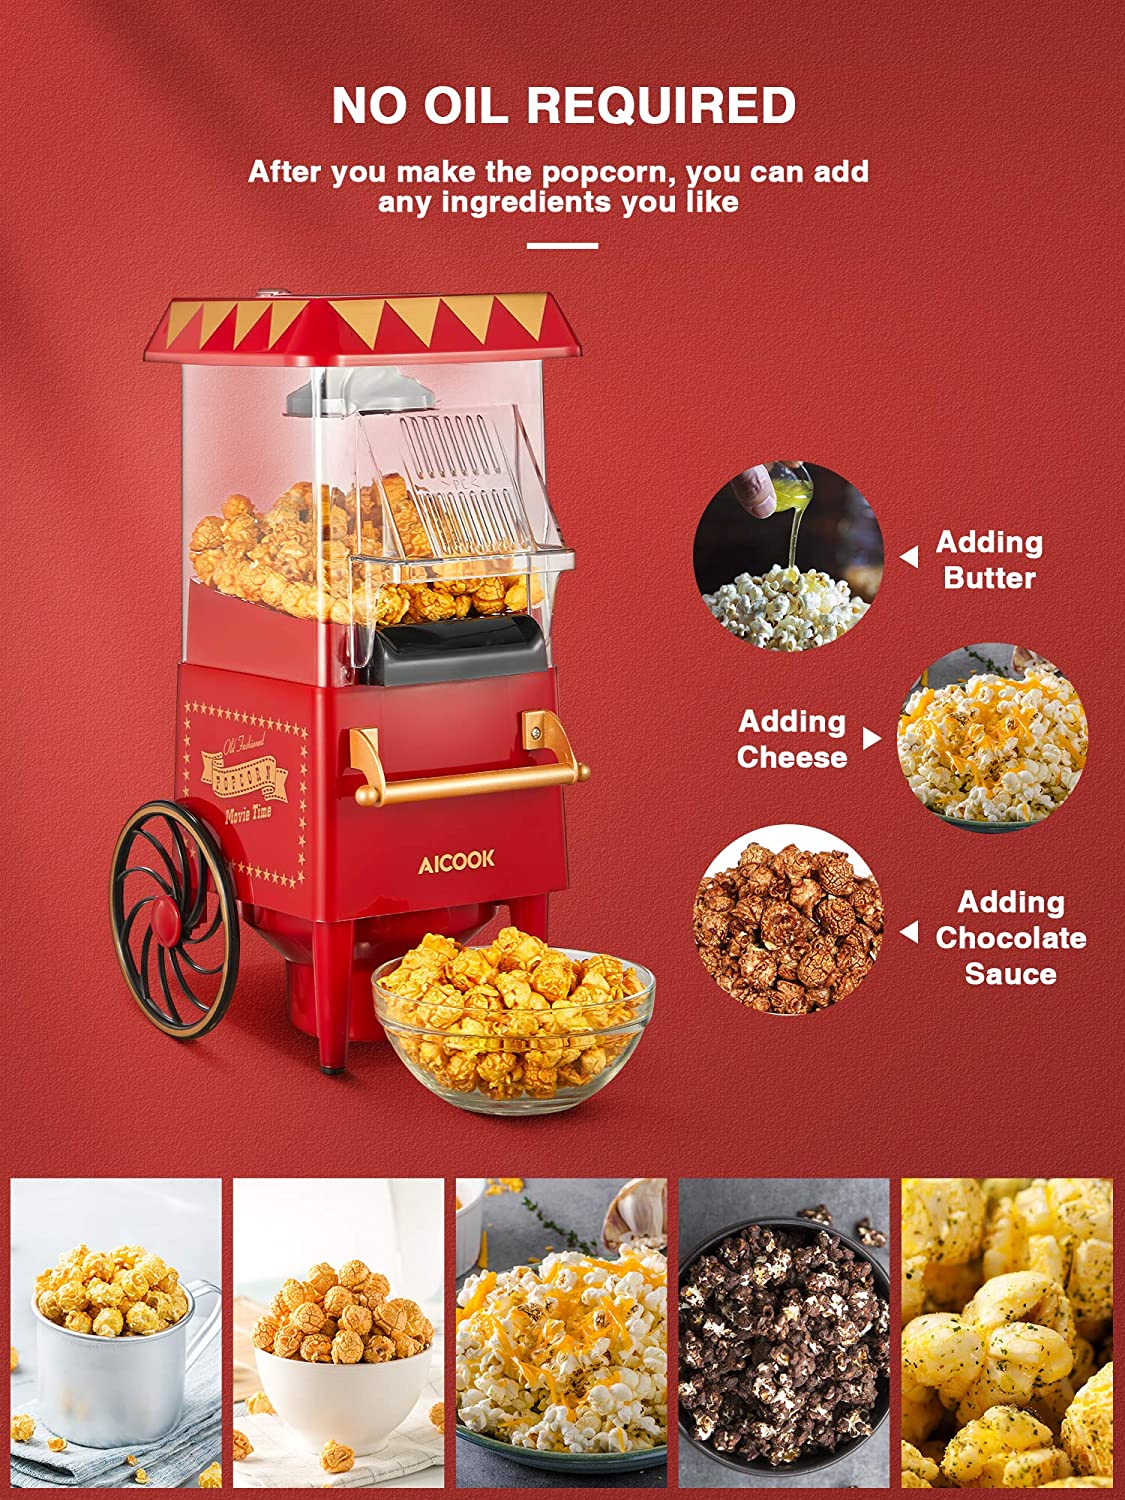 AICOOK | Popcorn Maker Retro, 1200W Hot Air Home Popcorn Popper with Measuring Cup, ETL Certified, BPA-Free, Vintage Style Popcorn Machine, No Oil Required